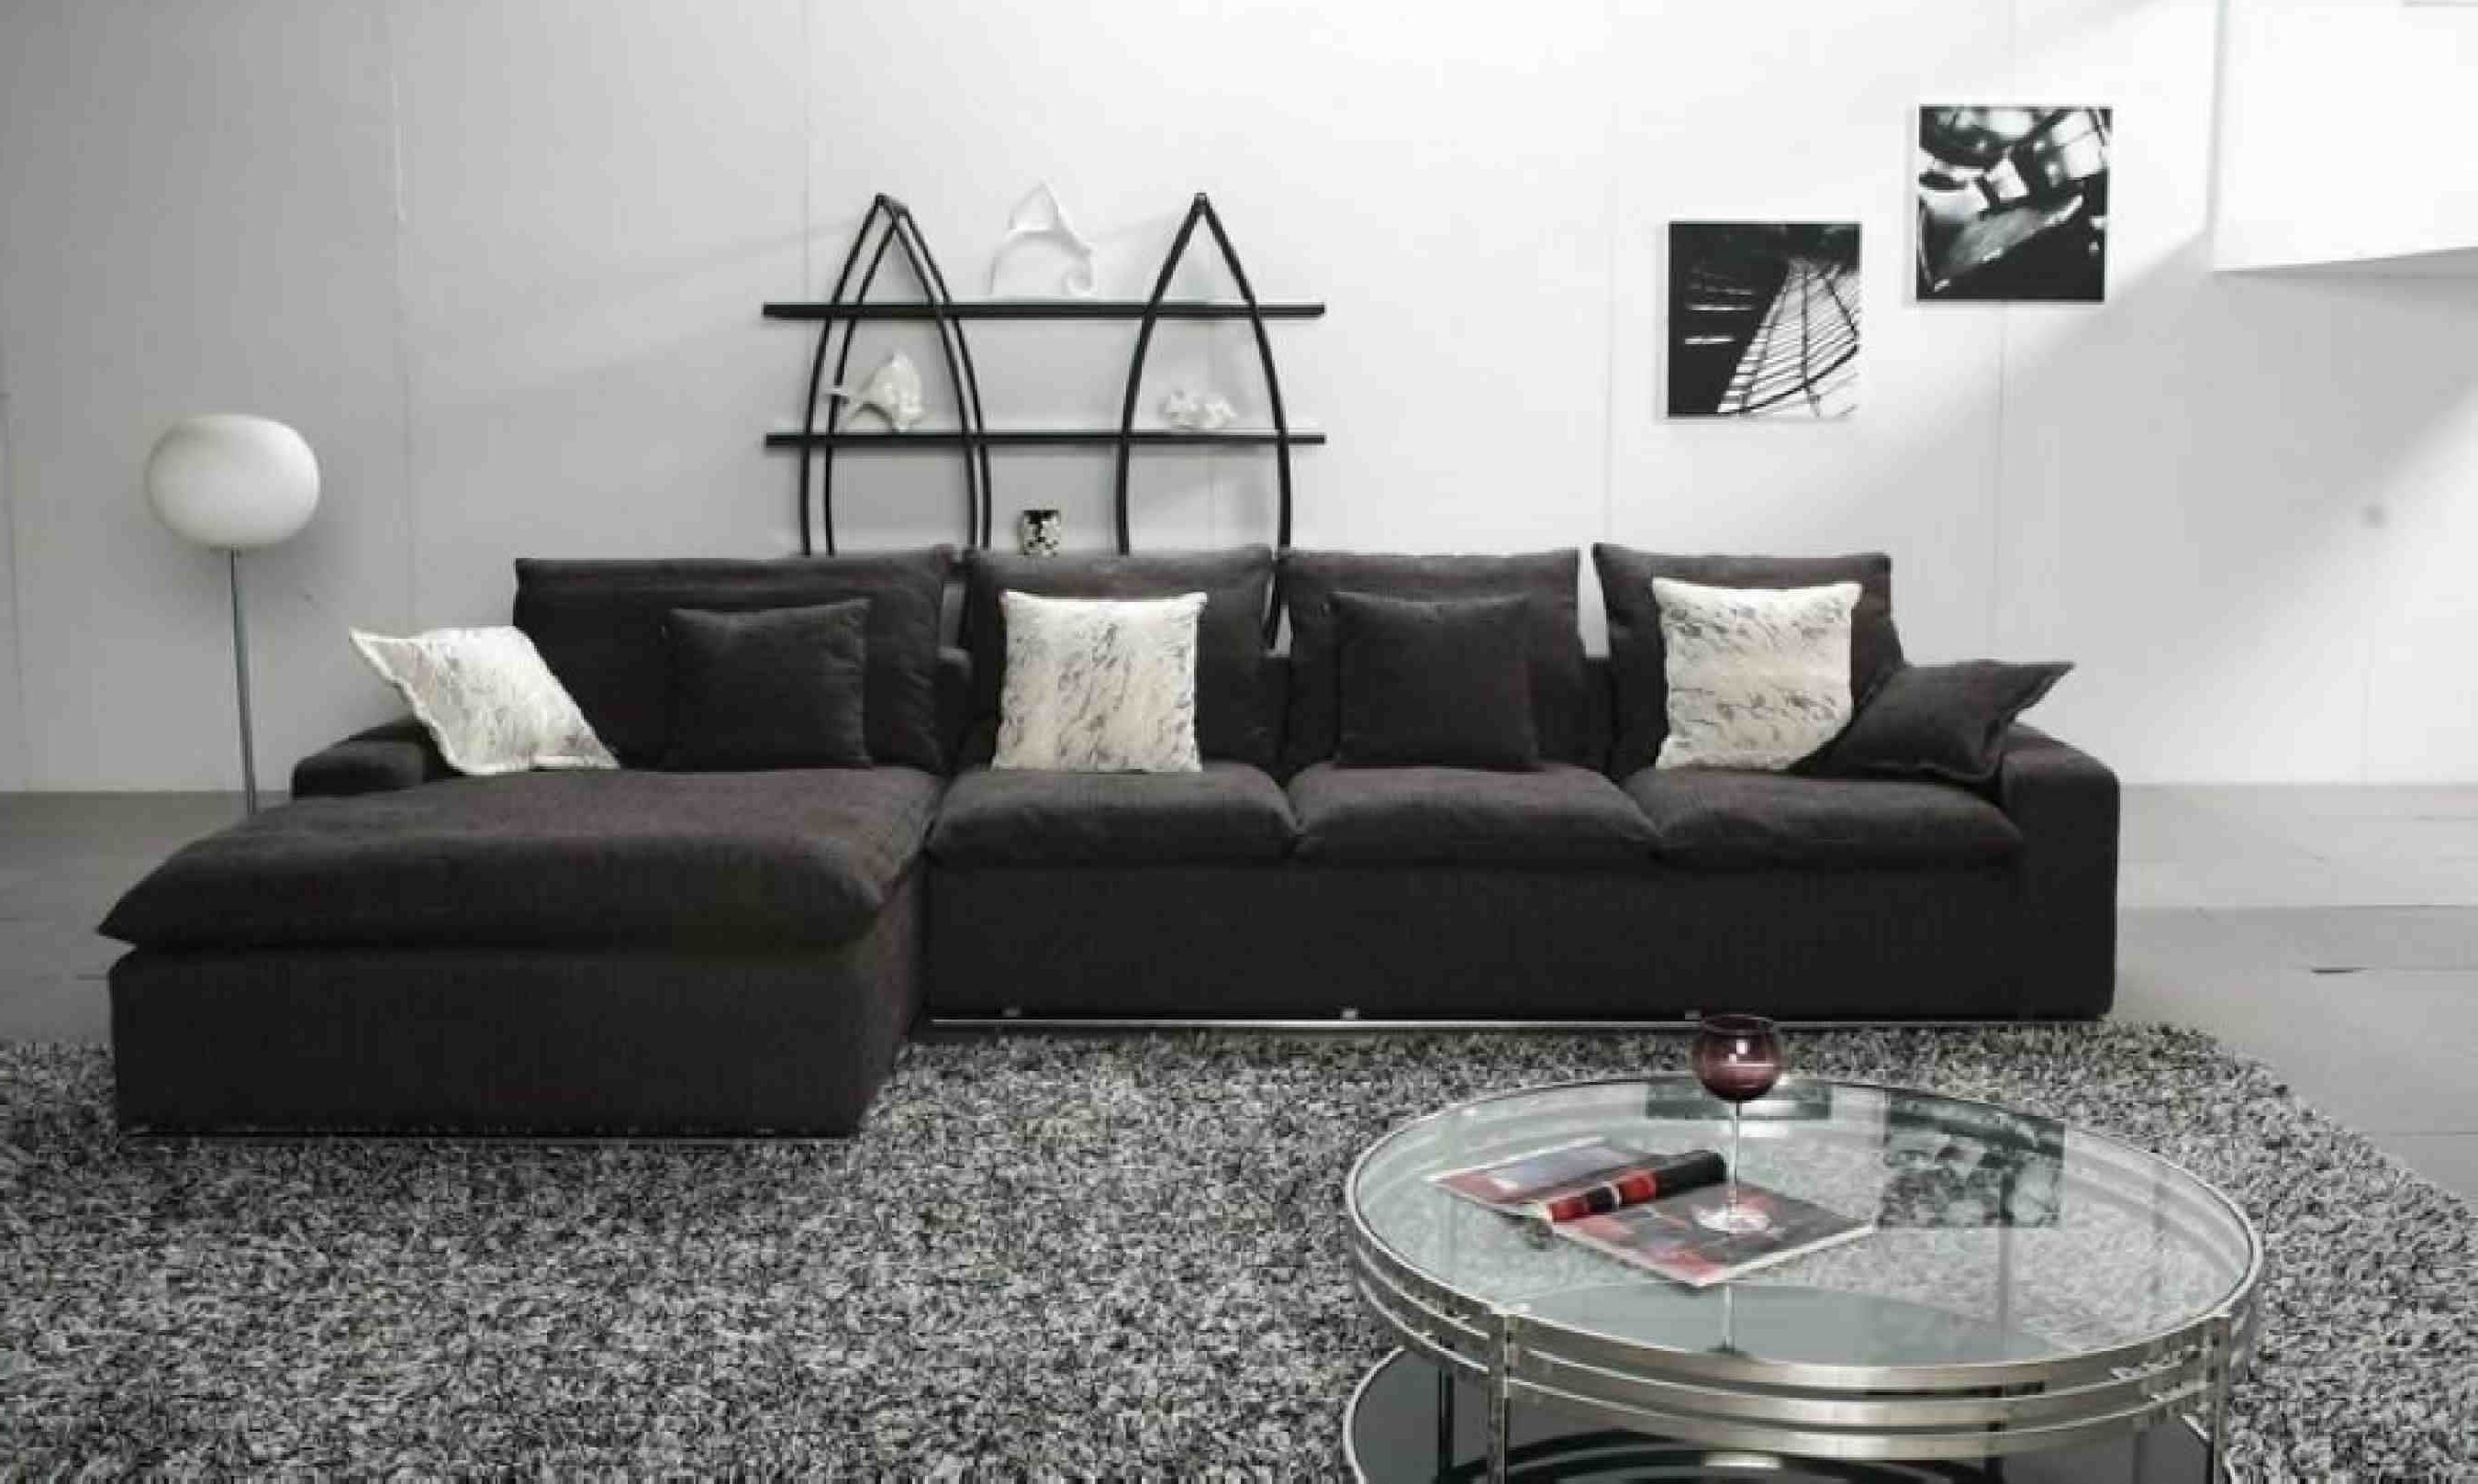 Sectional Sofa Design: Low Profile Sectional Sofa Contemporary Mid Inside Trendy Sleek Sectional Sofas (View 1 of 20)